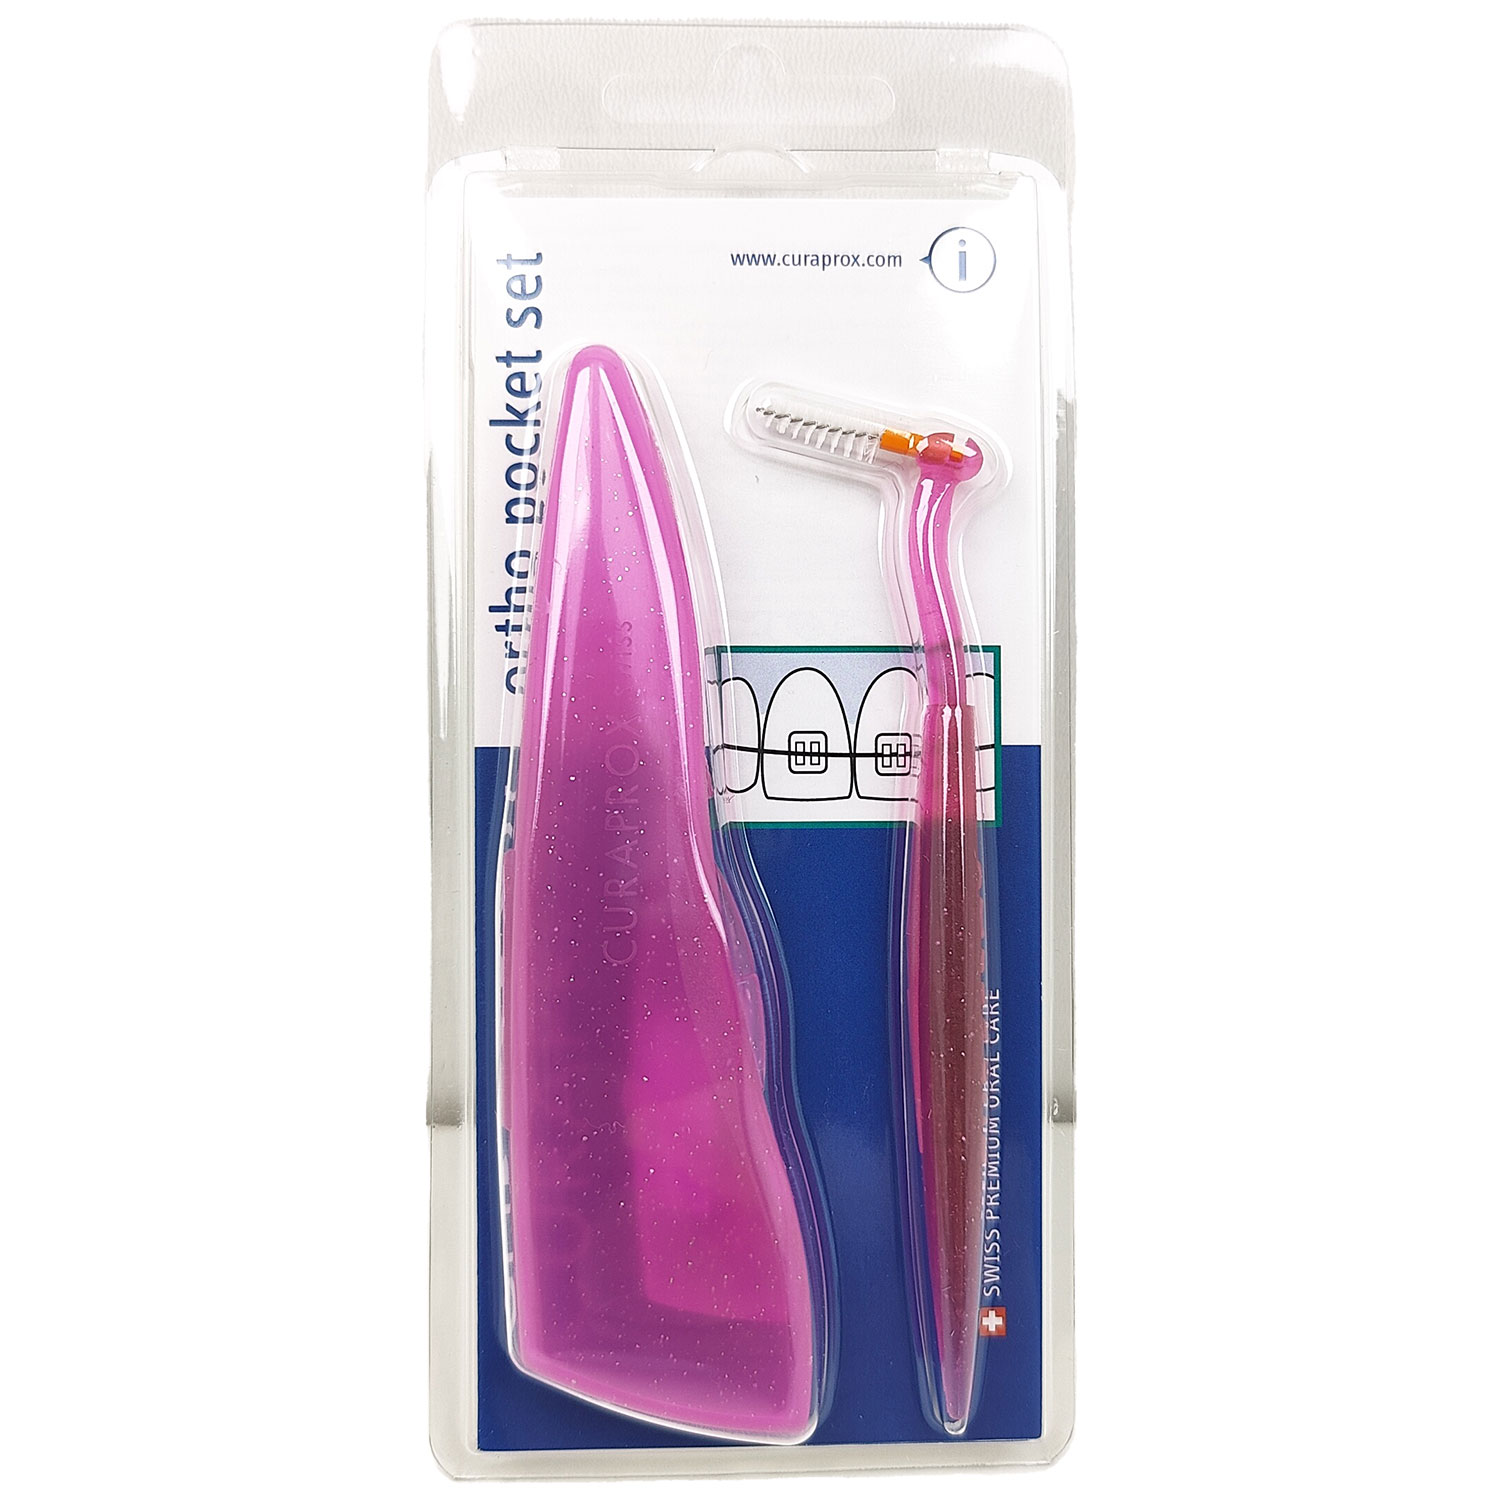 Curaprox Ortho Pocket Set cps 451 PINK